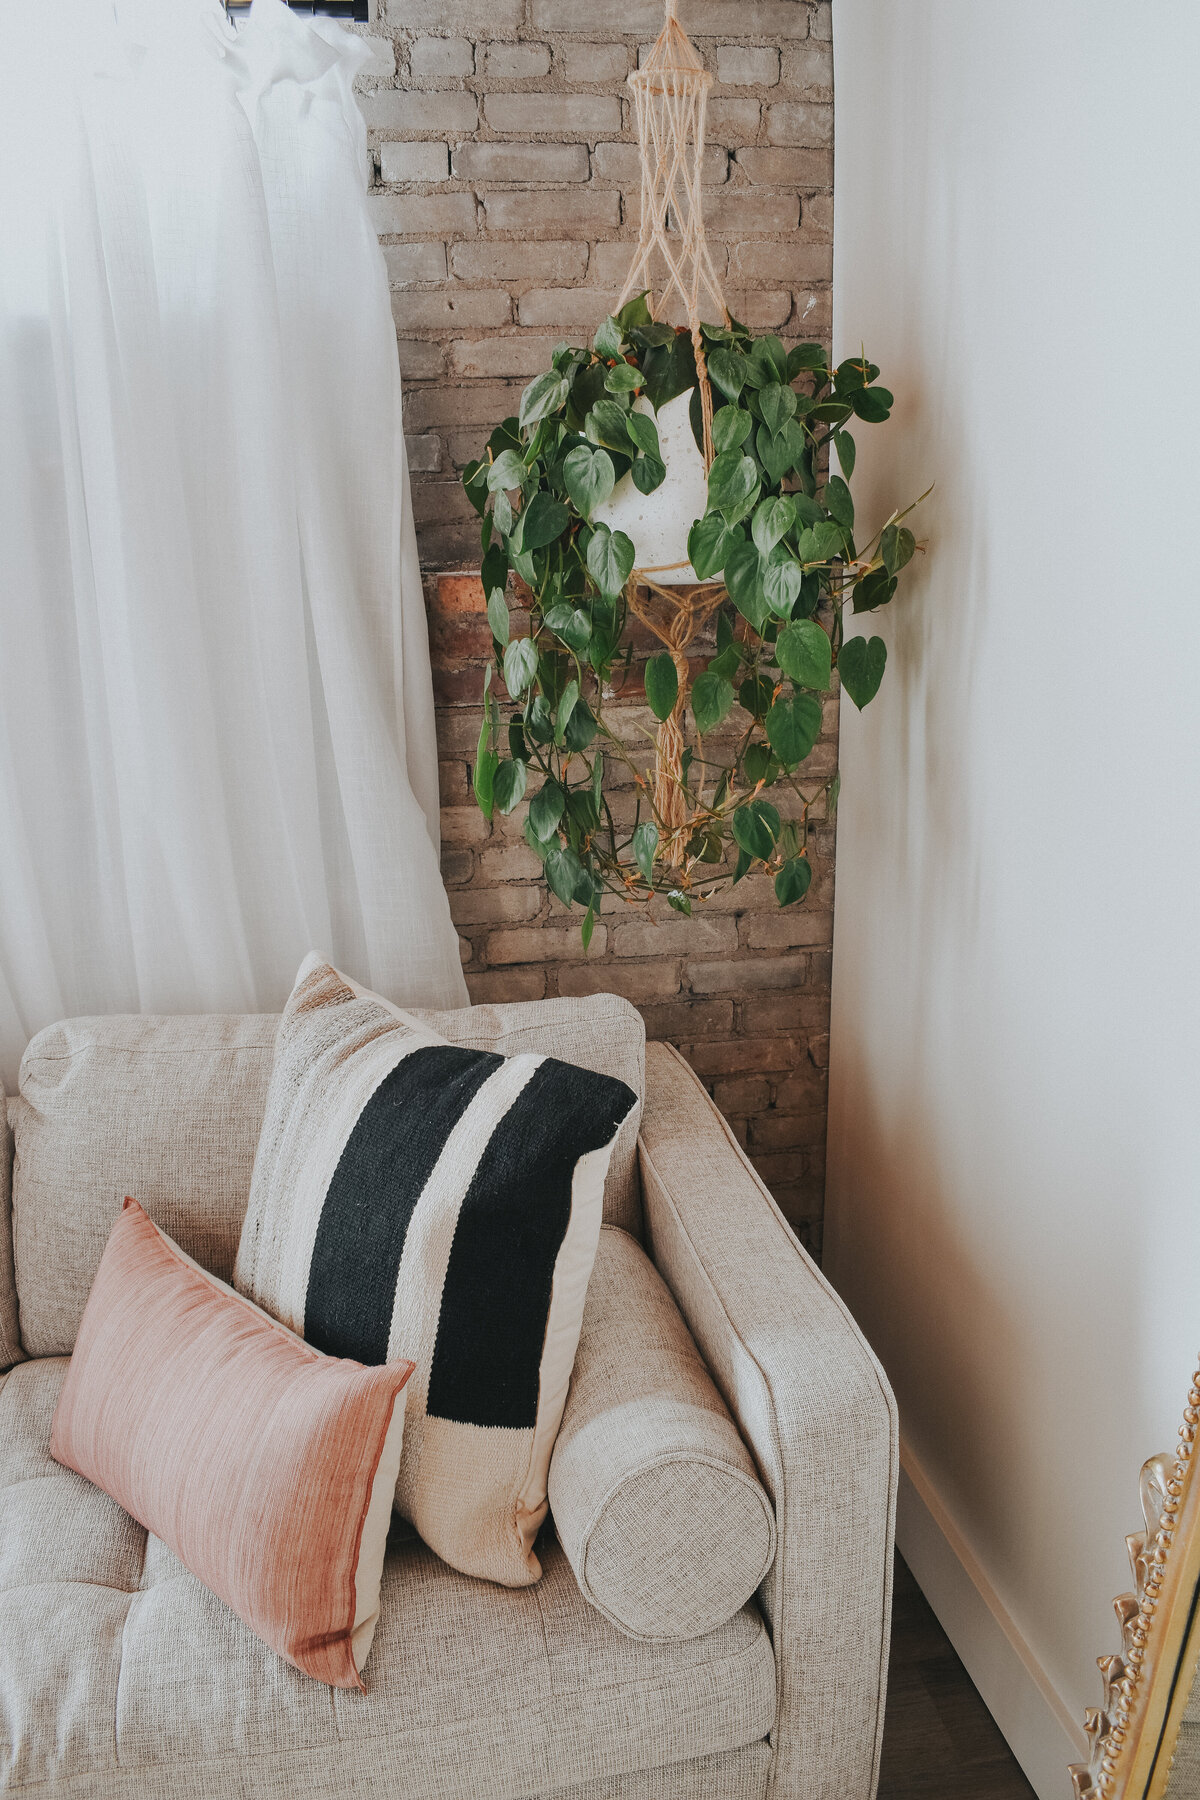 A macrame plant hanger holds a pothos plant next to a grey couch